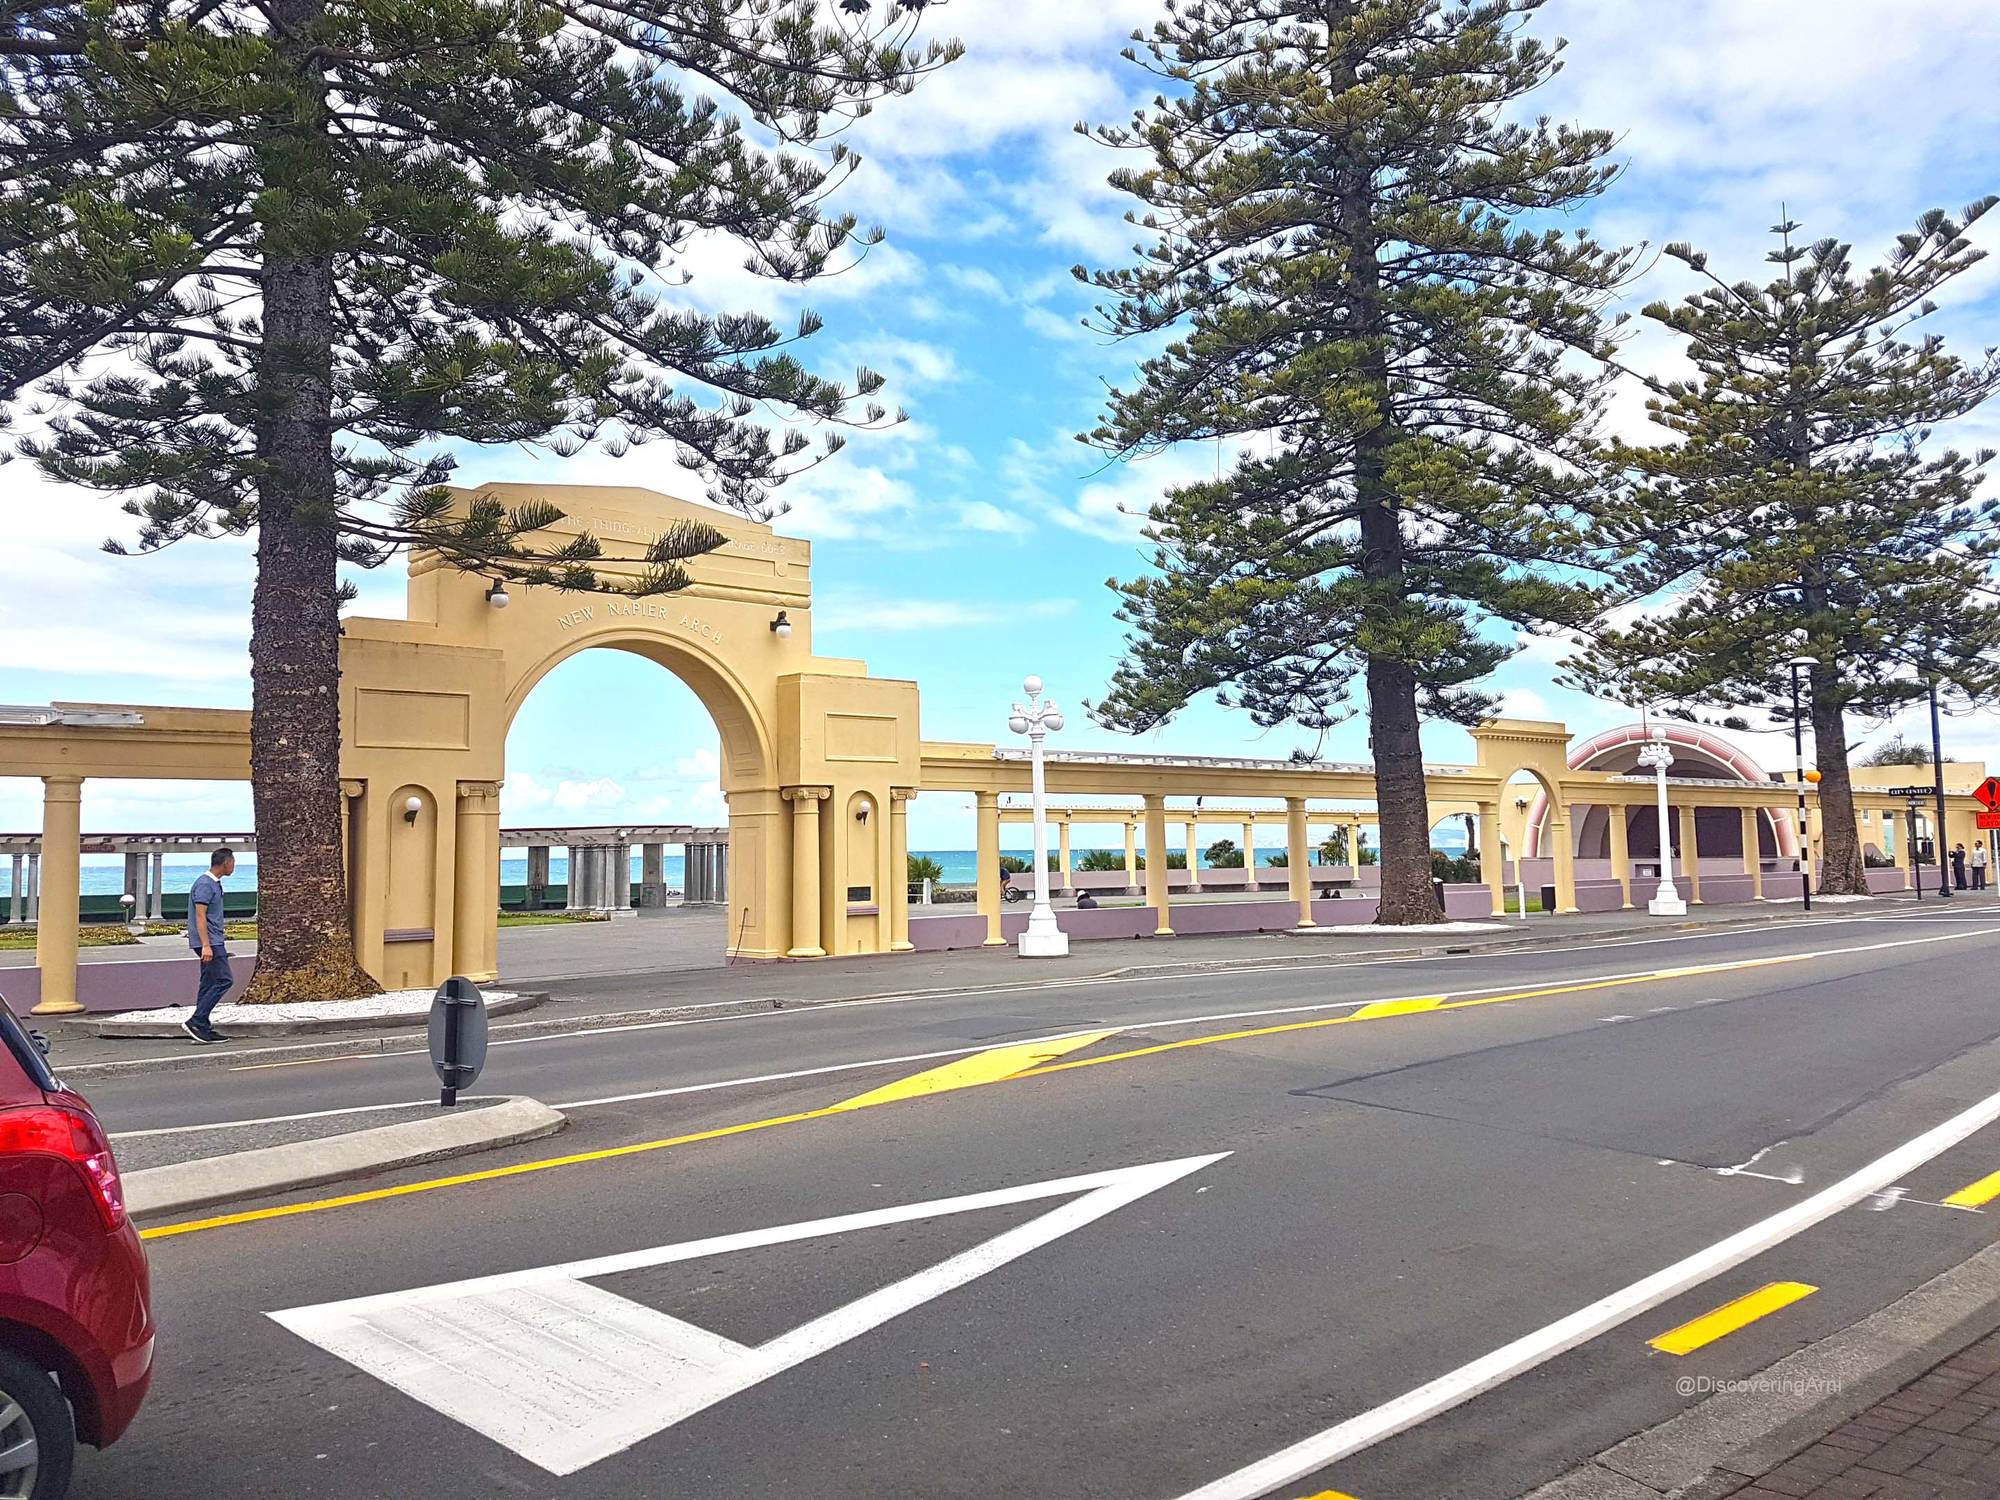 Napier Arch at the Colonnade with Norfolk Pines